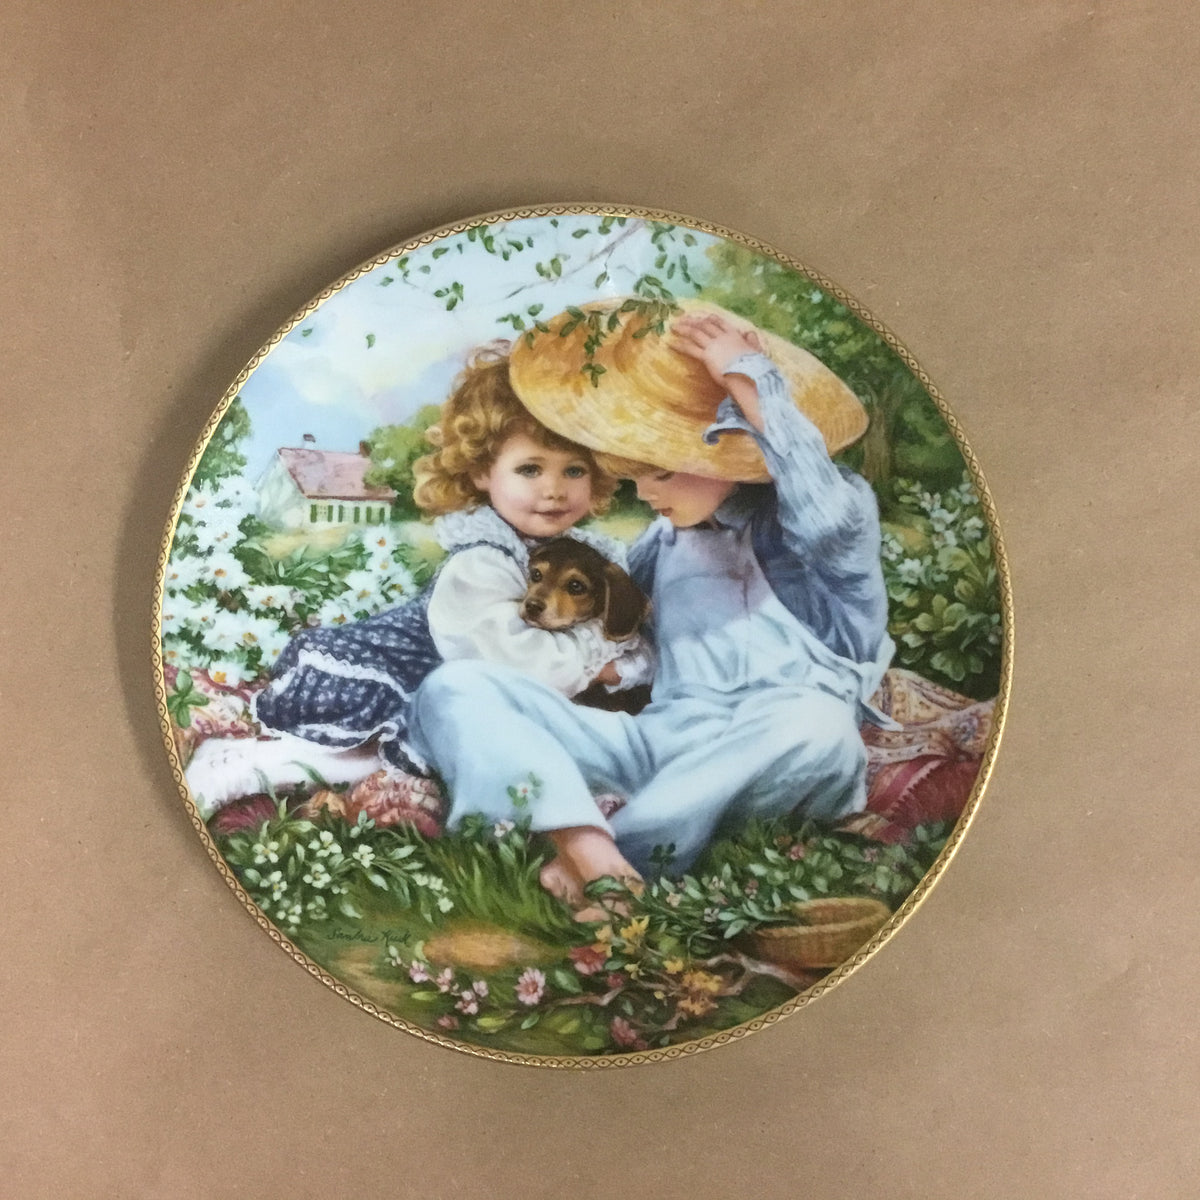 Vintage Collectors Plate A Time To Love By Sandra Kuck 1989 Plate No Found